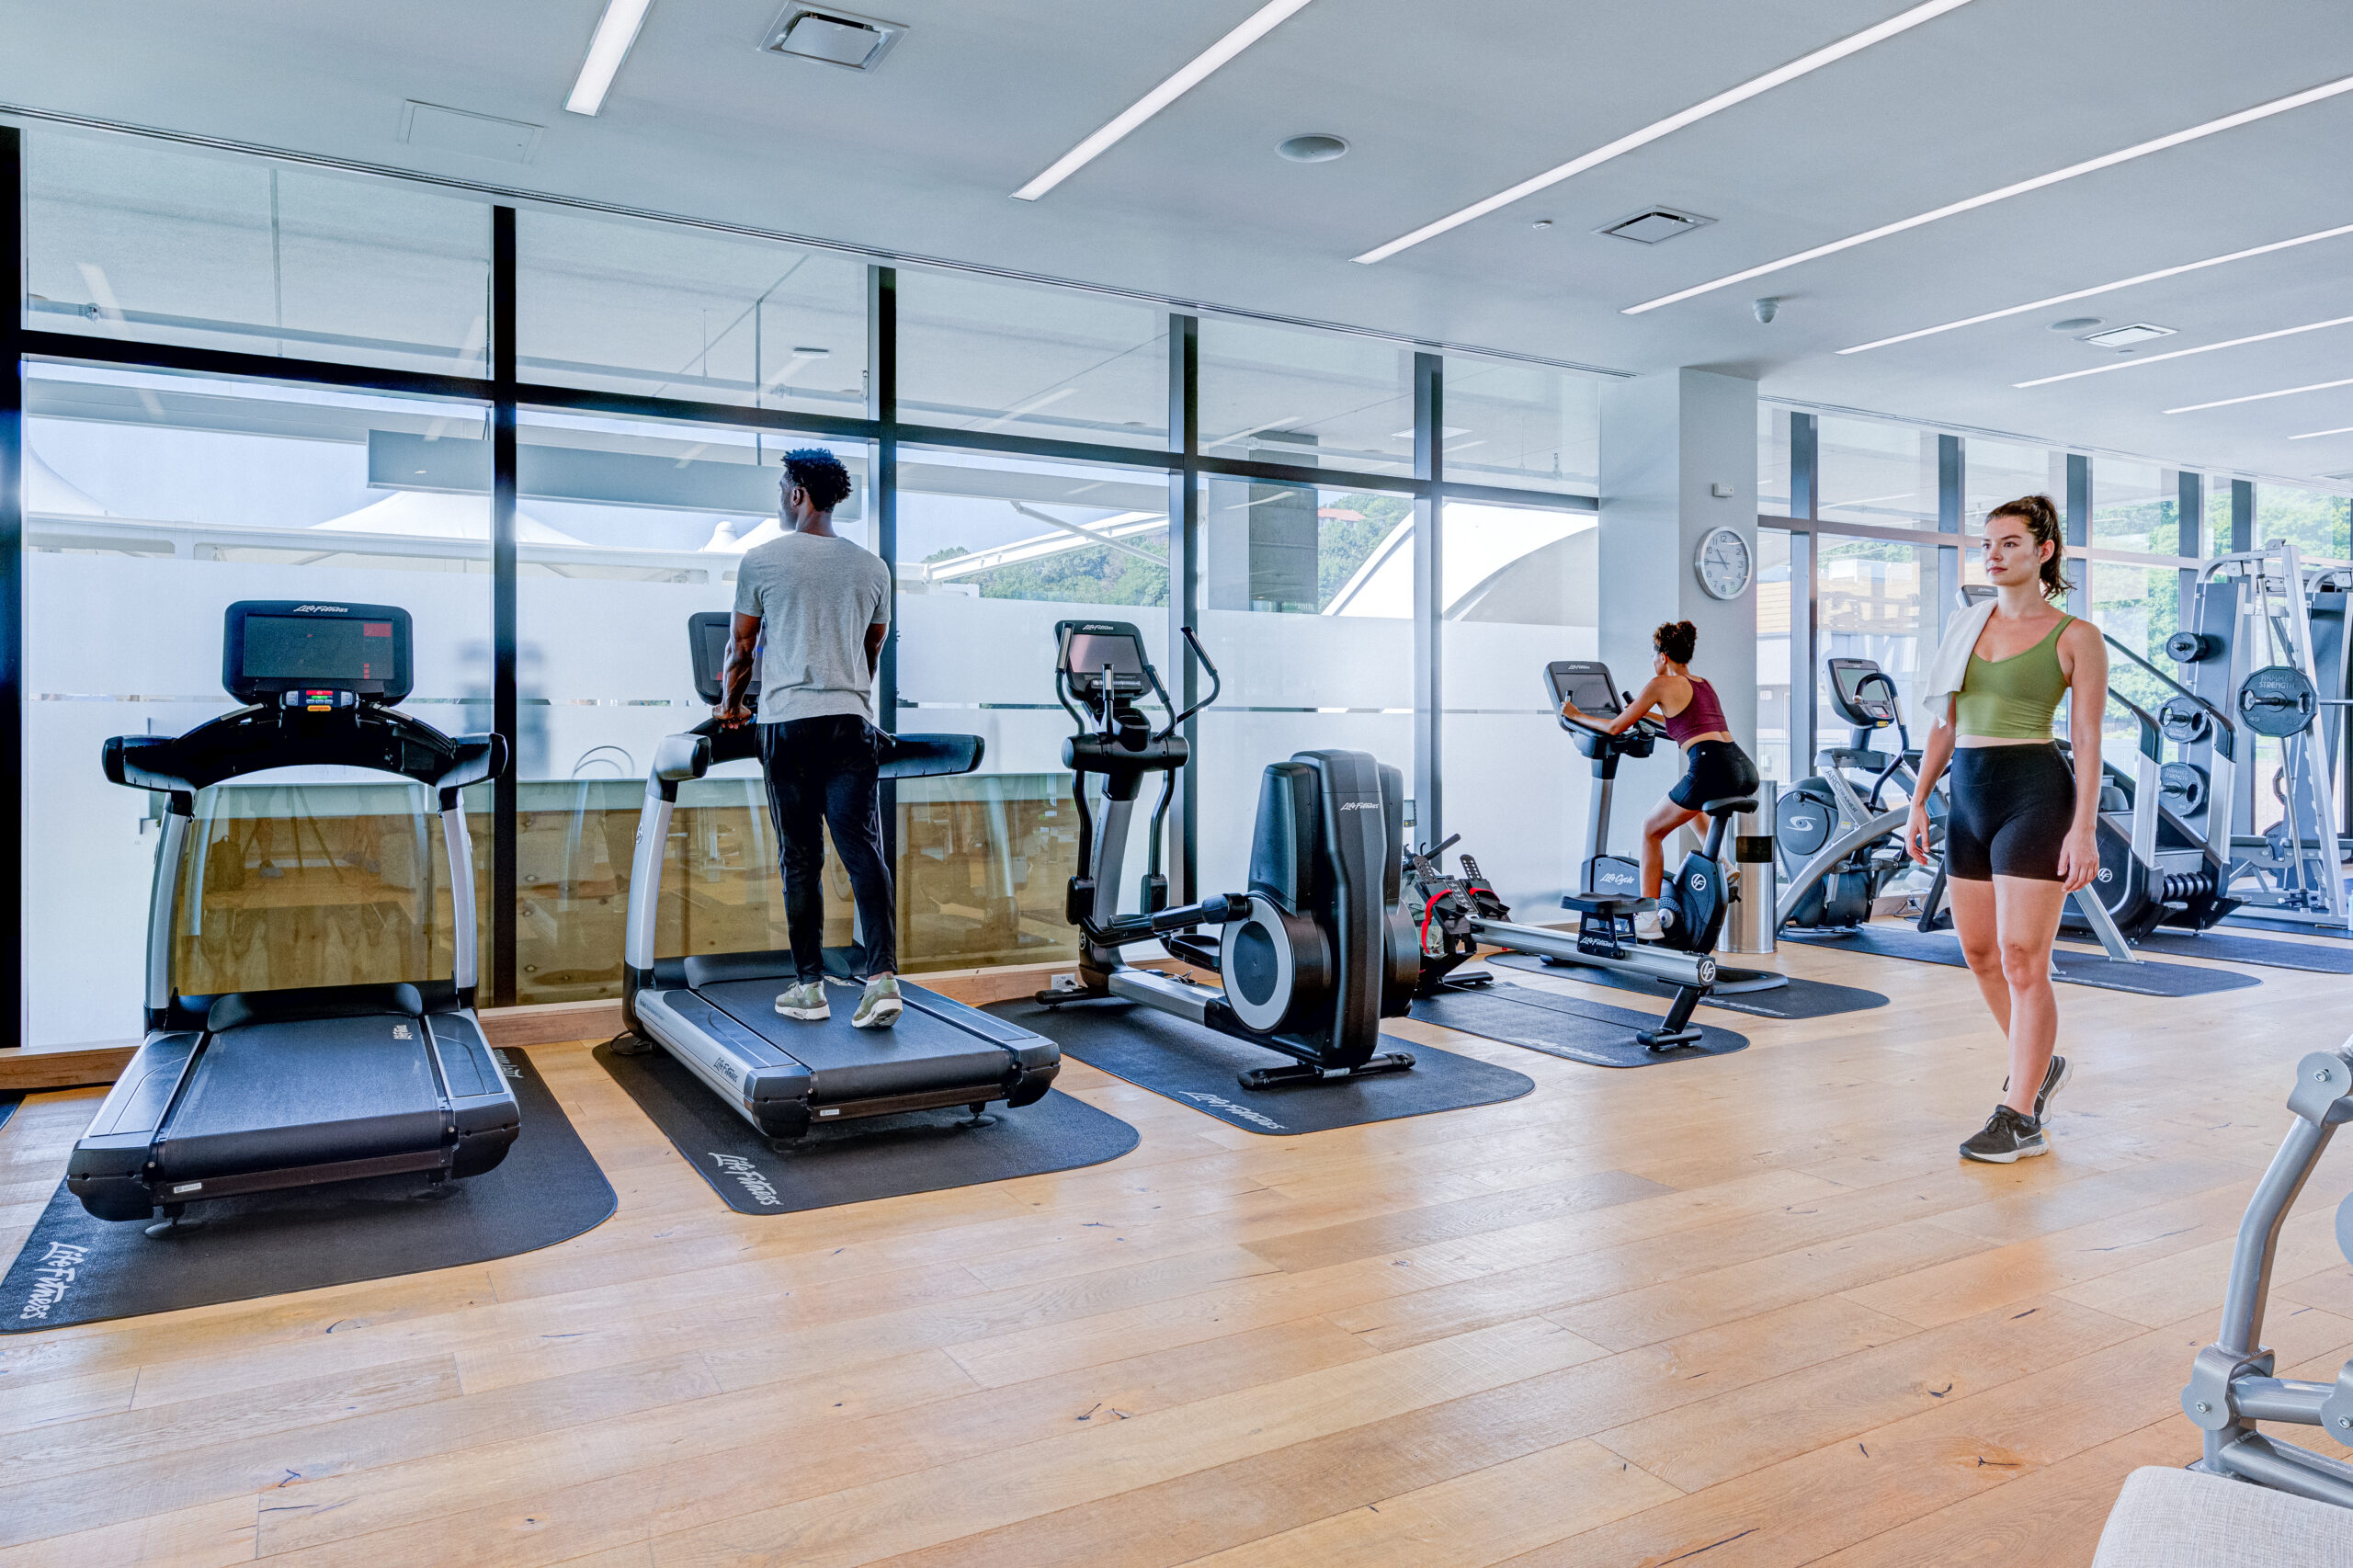 A woman and man work out, while another woman passes by, in the Fitness Center at SoJo Spa Club